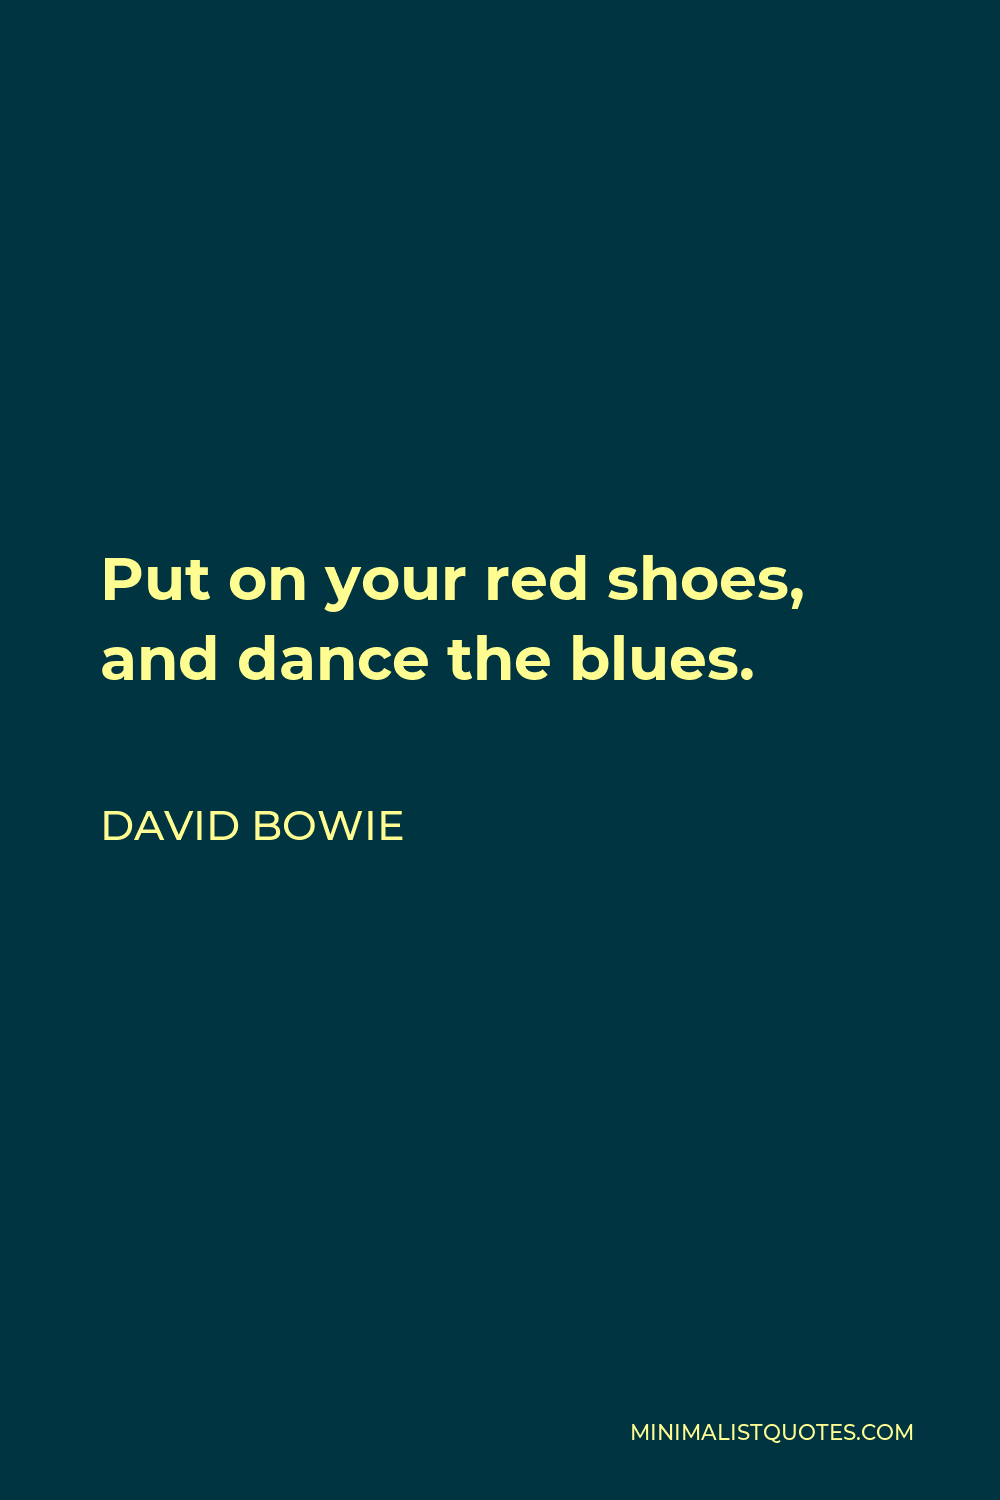 David Bowie Quote: Put on your red shoes, and dance the blues.